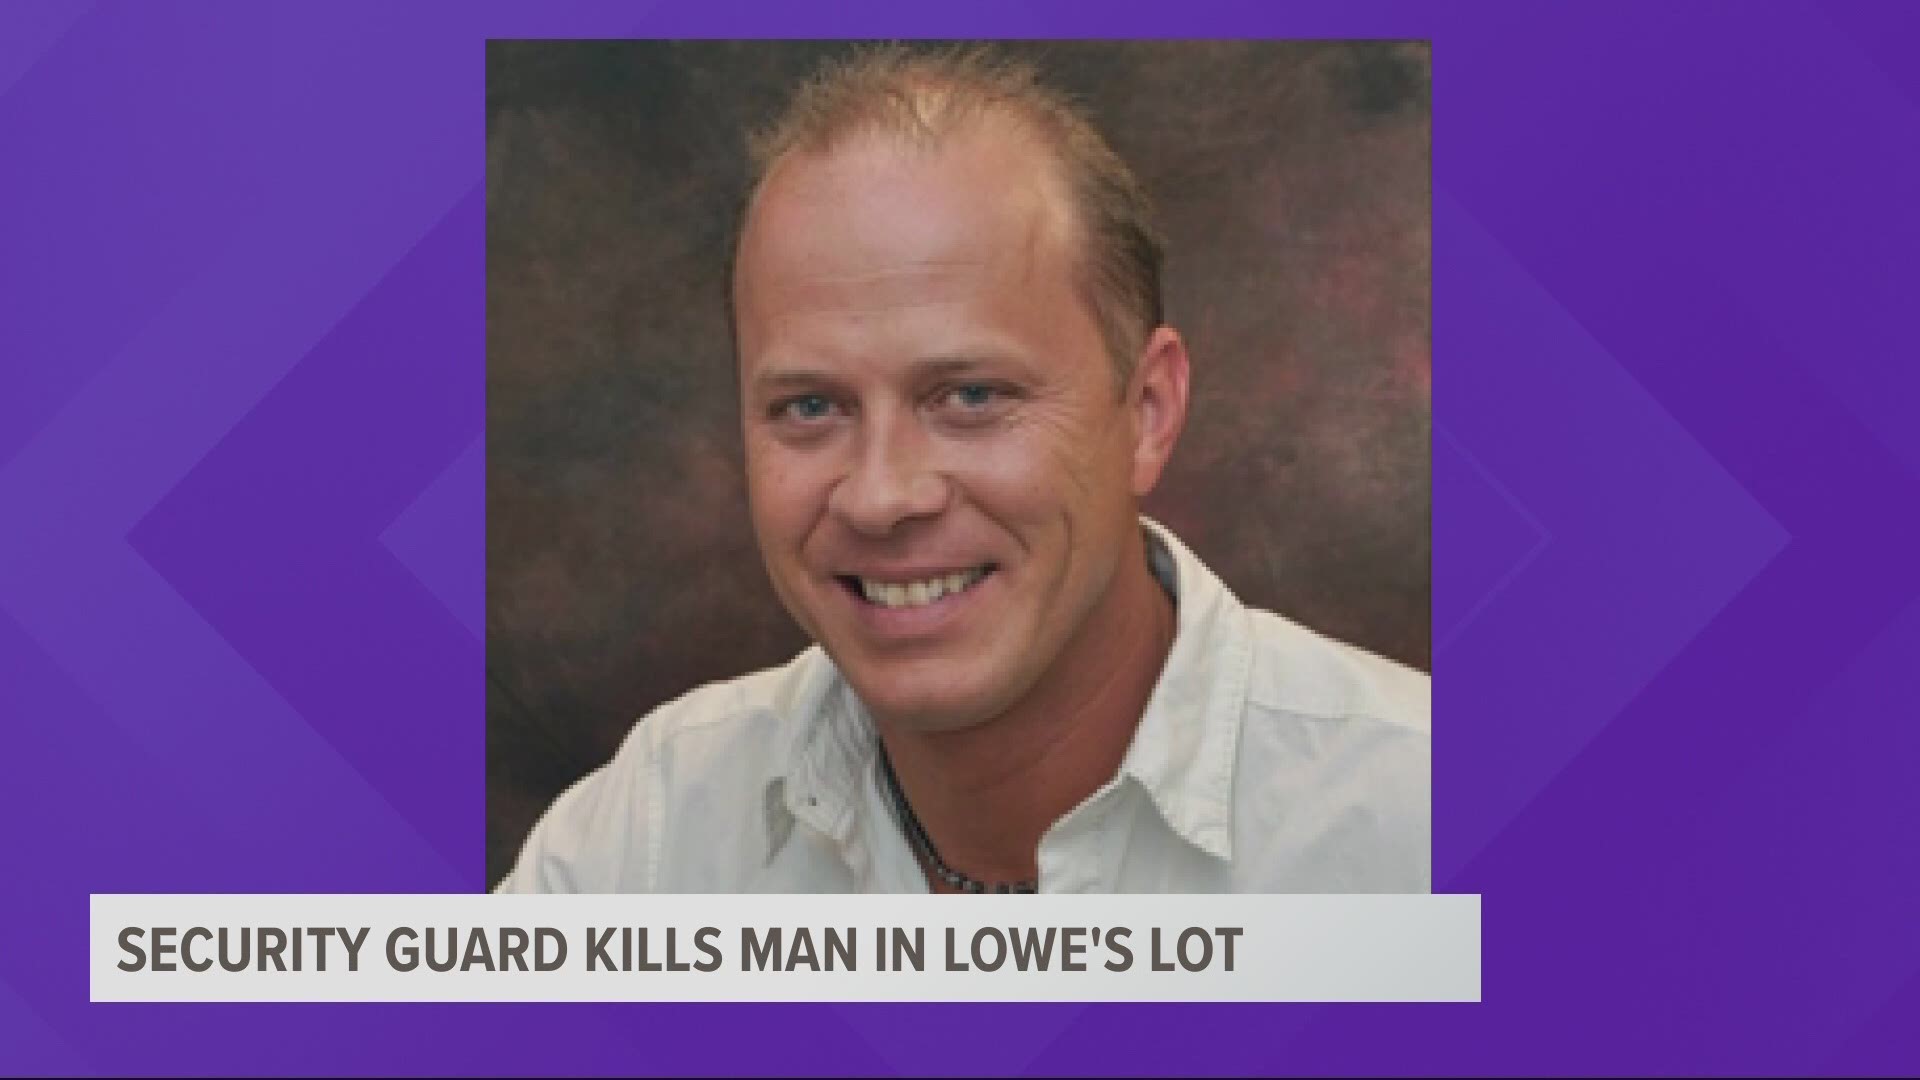 A security guard shot and killed a man in a Lowe’s parking lot over the weekend. Pat Dooris has the latest on the investigation.